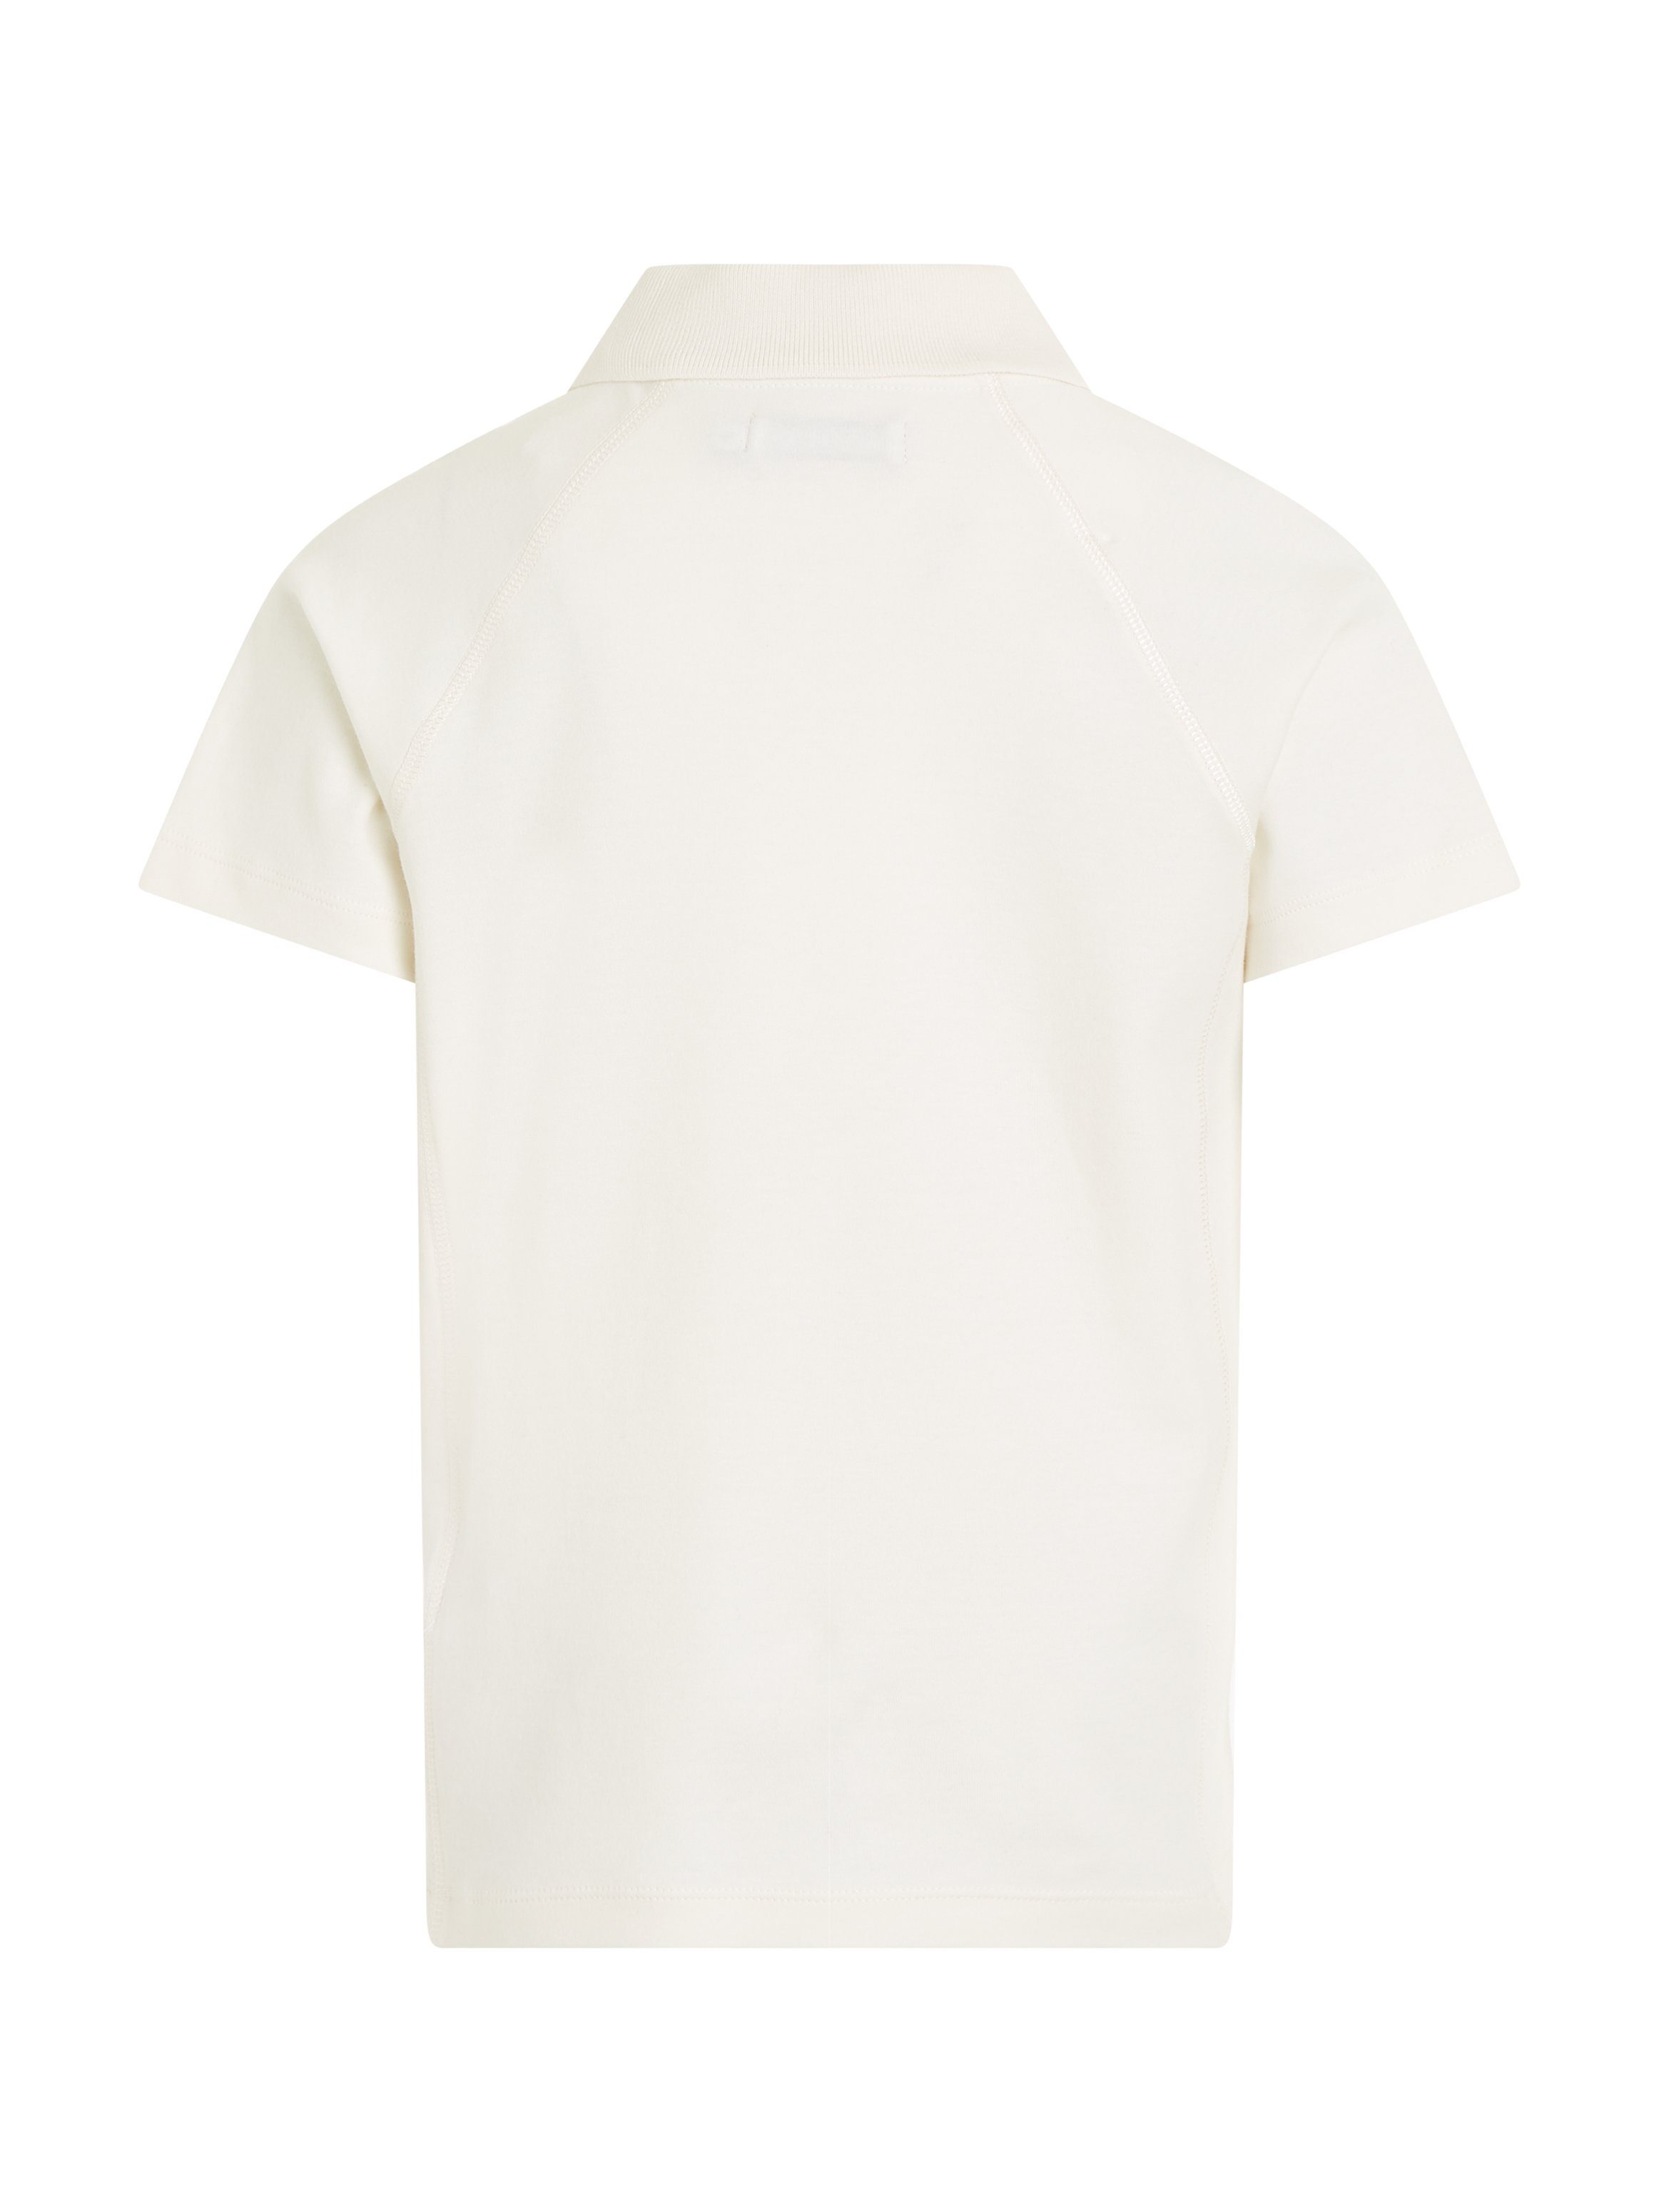 JERSEY Bright Calvin Poloshirt SOFT Klein White Jeans mit Logopatch CEREMONY POLO